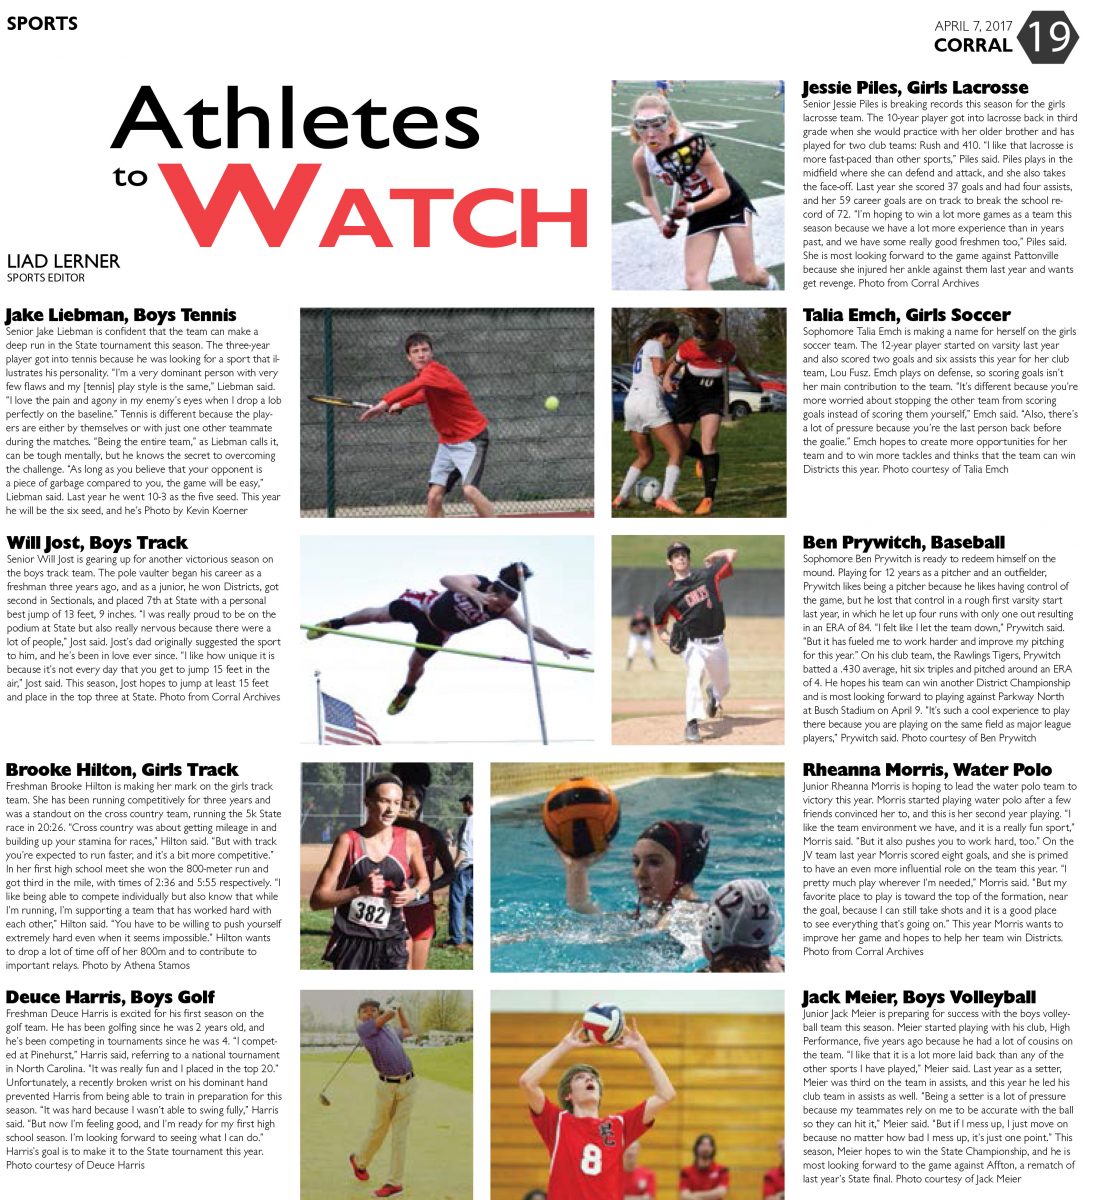 Athletes to watch